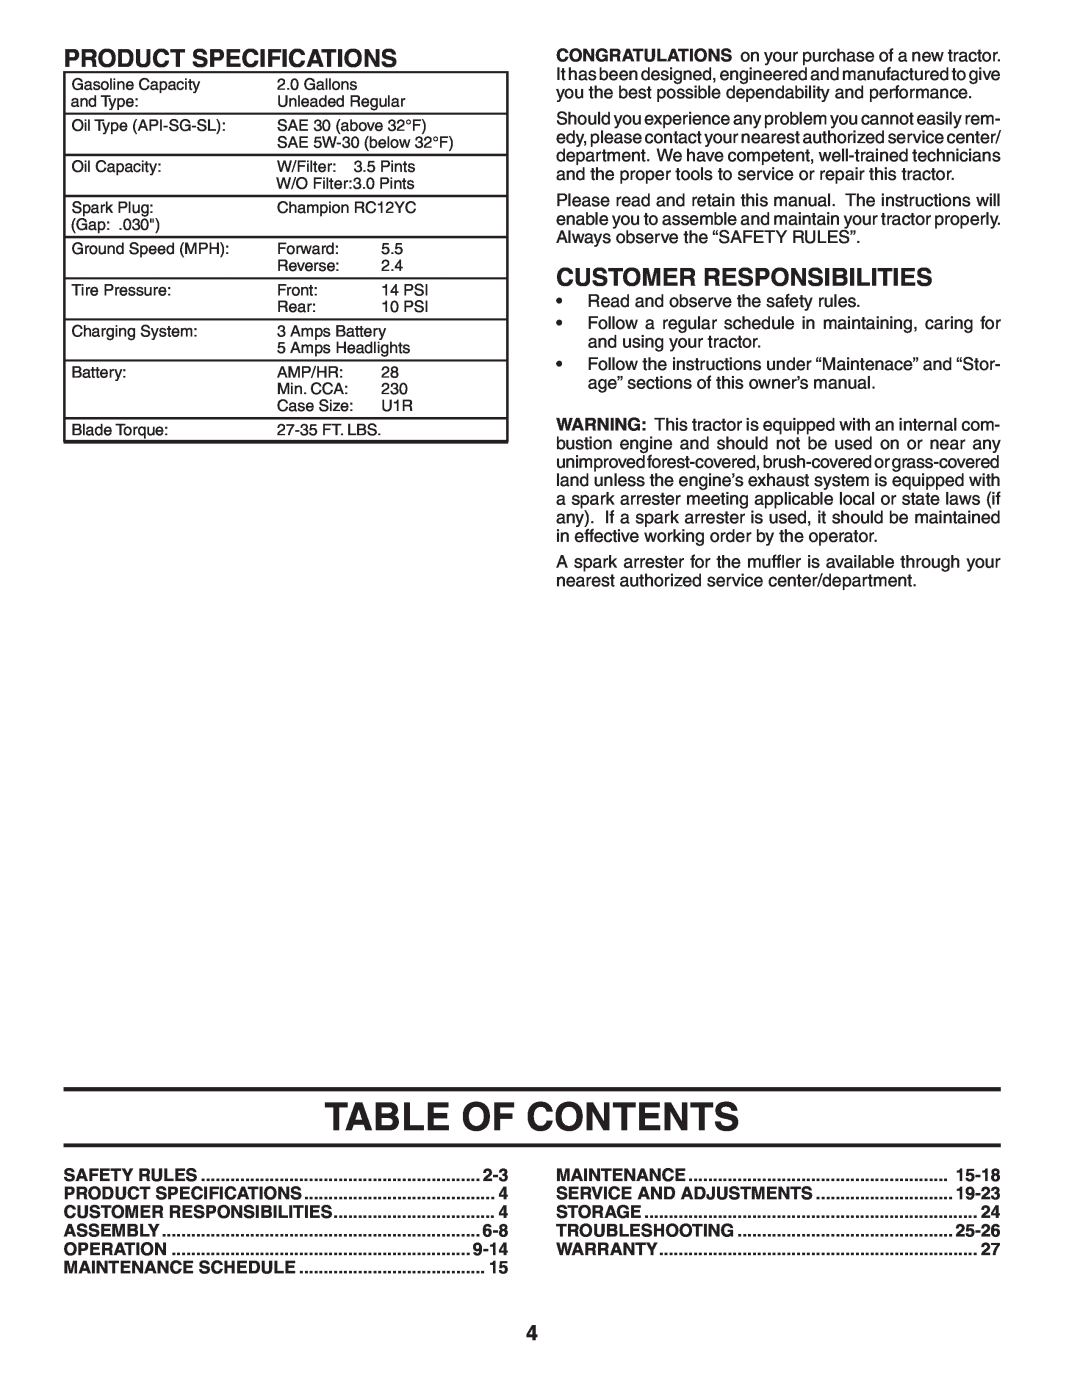 Poulan BB185H42LT manual Table Of Contents, Product Specifications, Customer Responsibilities, 9-14, 15-18, 19-23, 25-26 